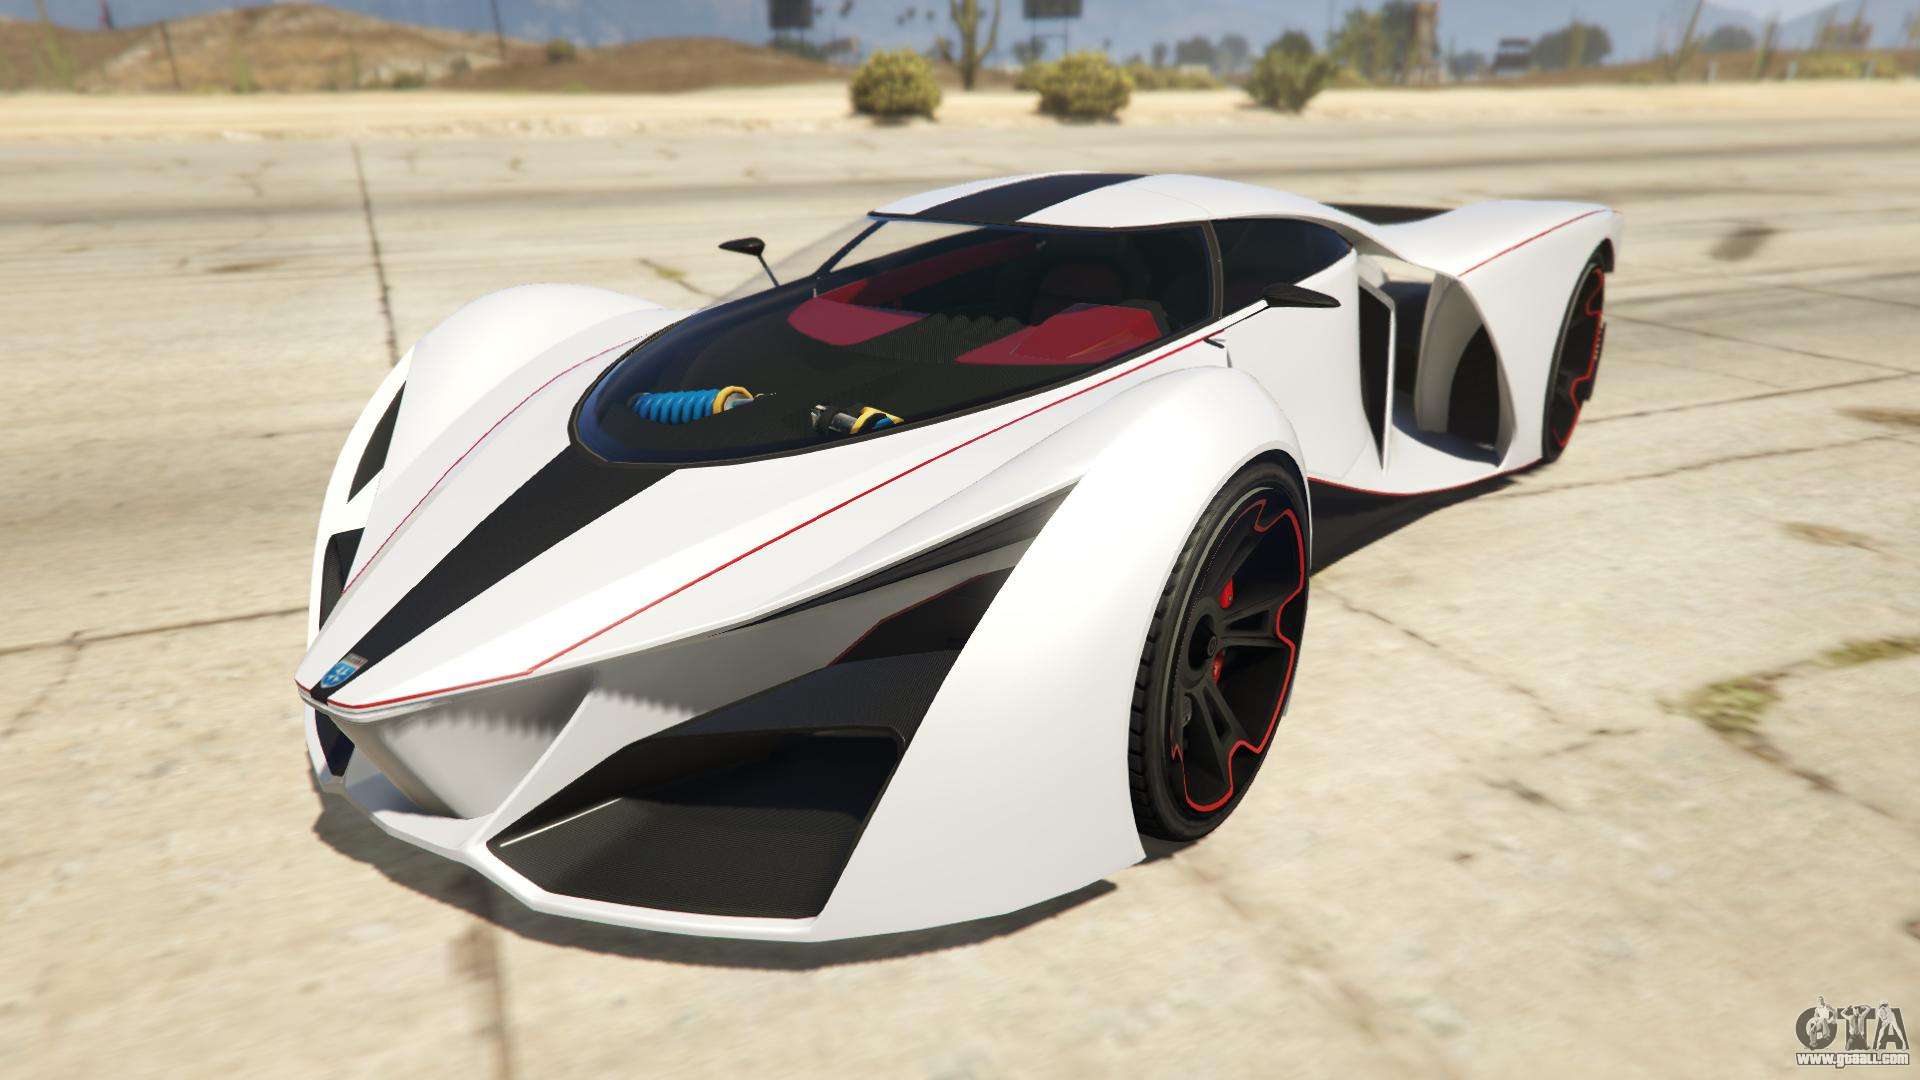 Grotti X80 Proto From Gta 5 Screenshots Features And Description Of The Supercar